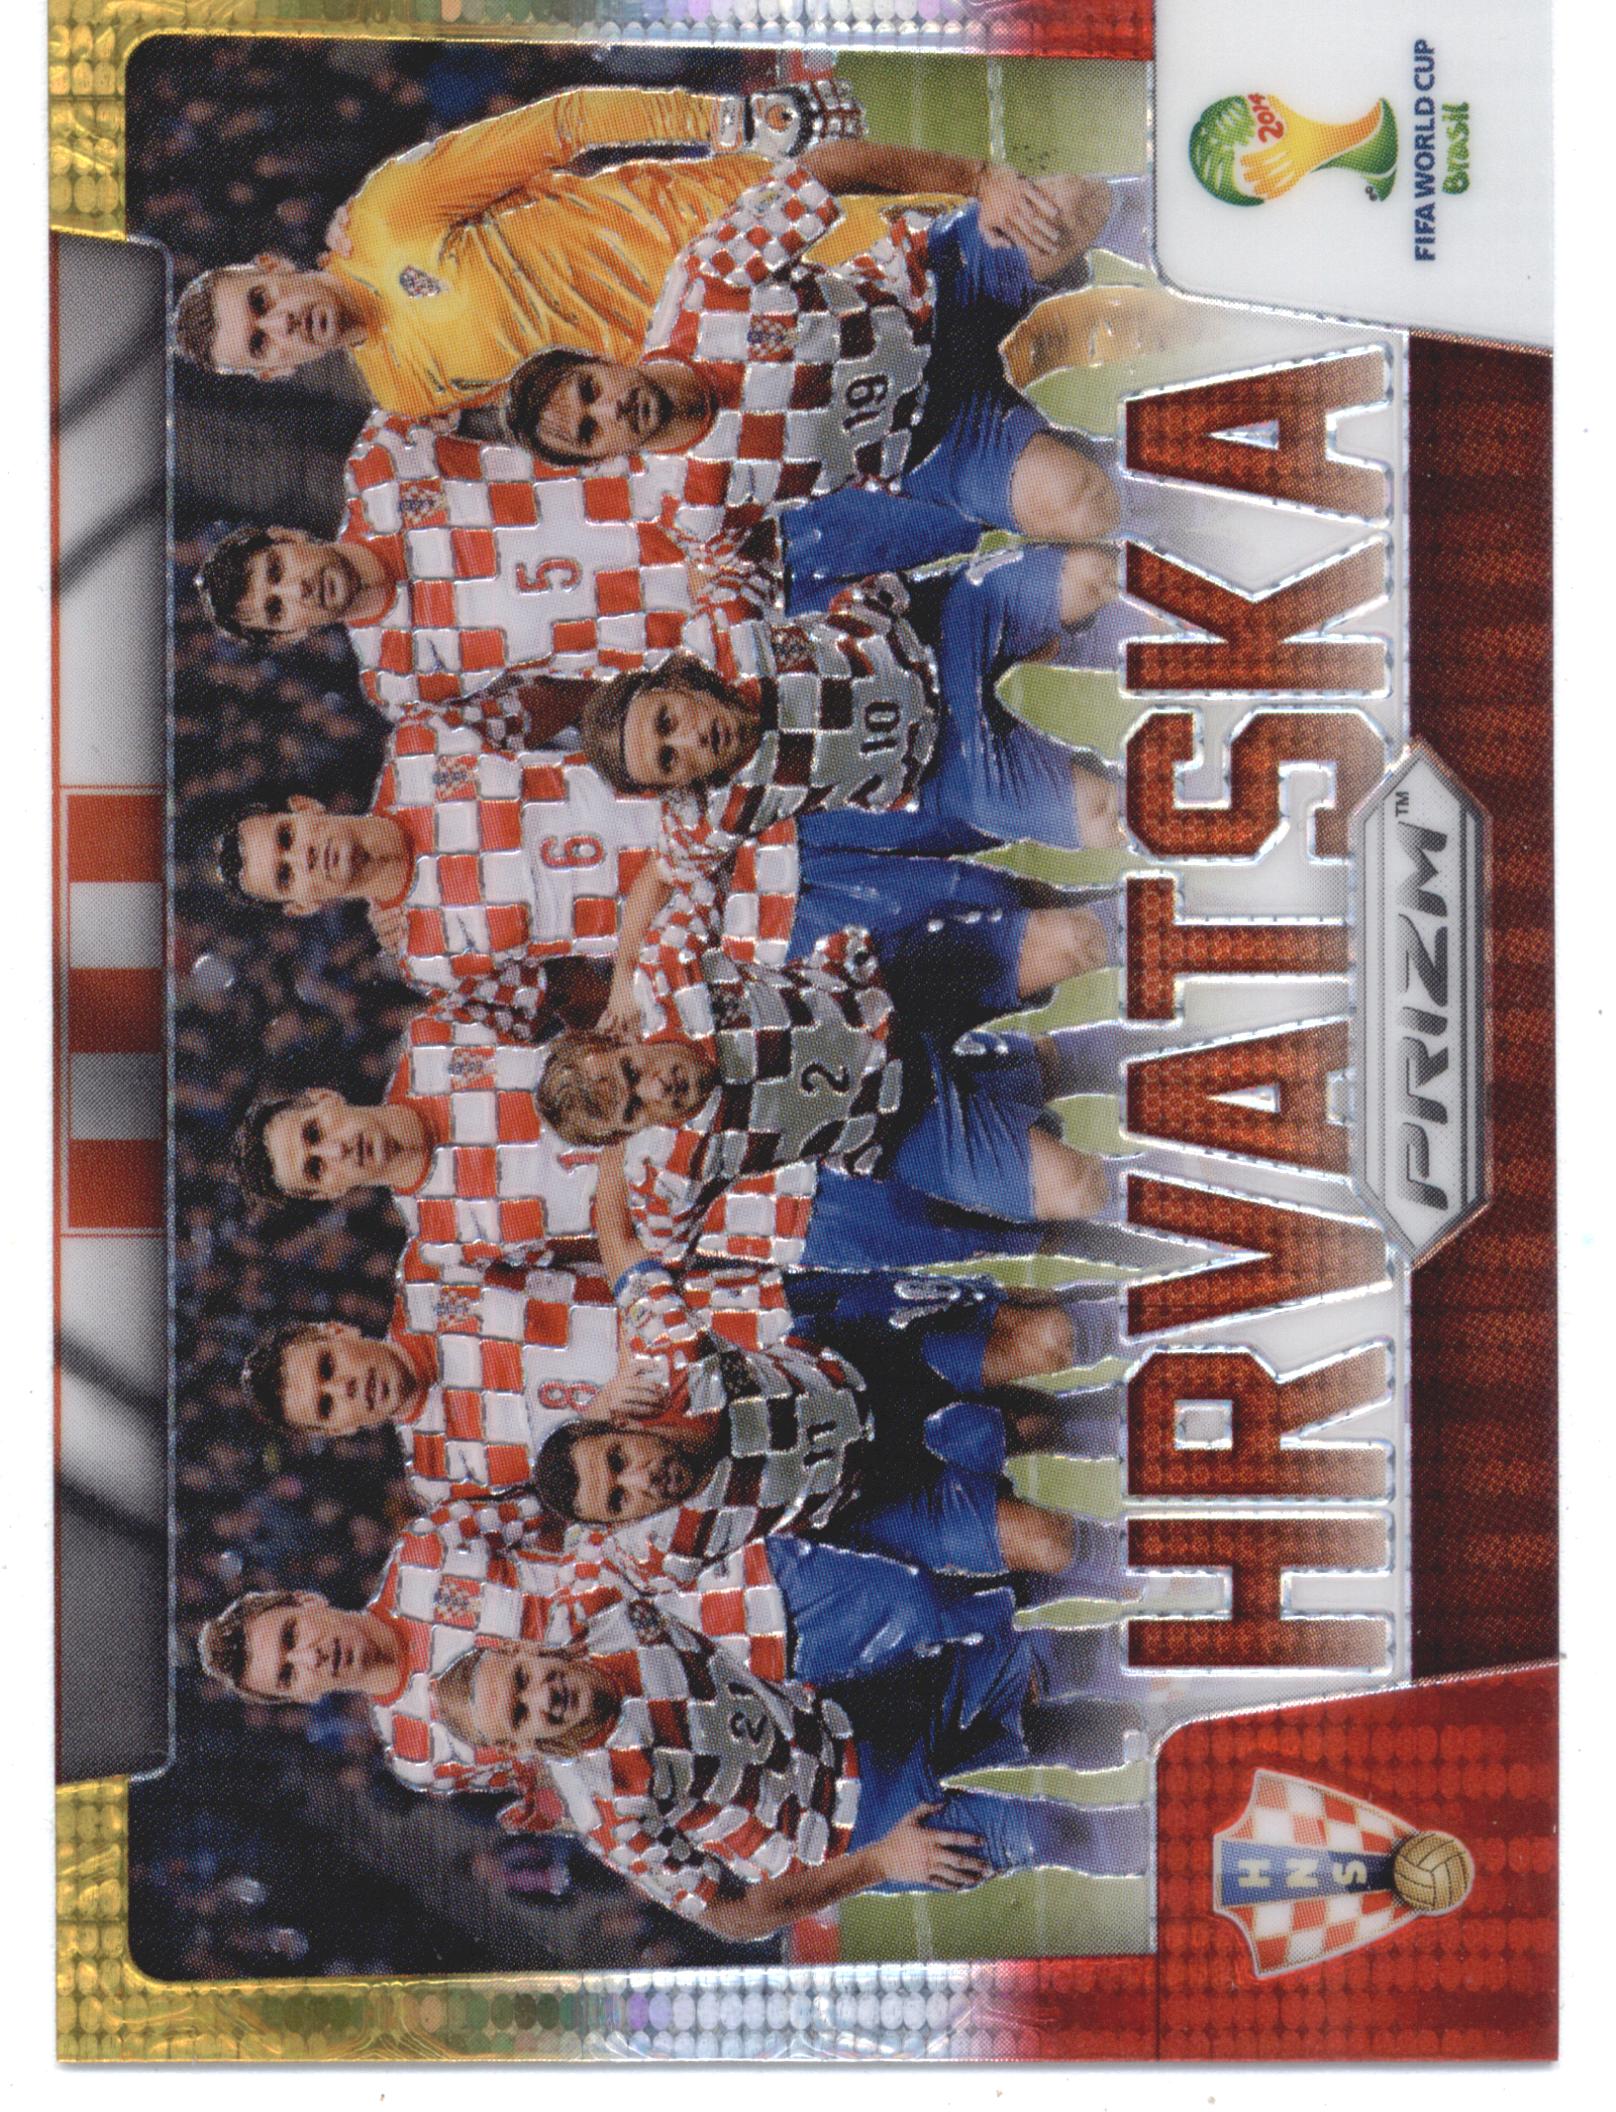 2014 Panini World Cup Prizm Team Photos Yellow and Red Pulsar Prizms